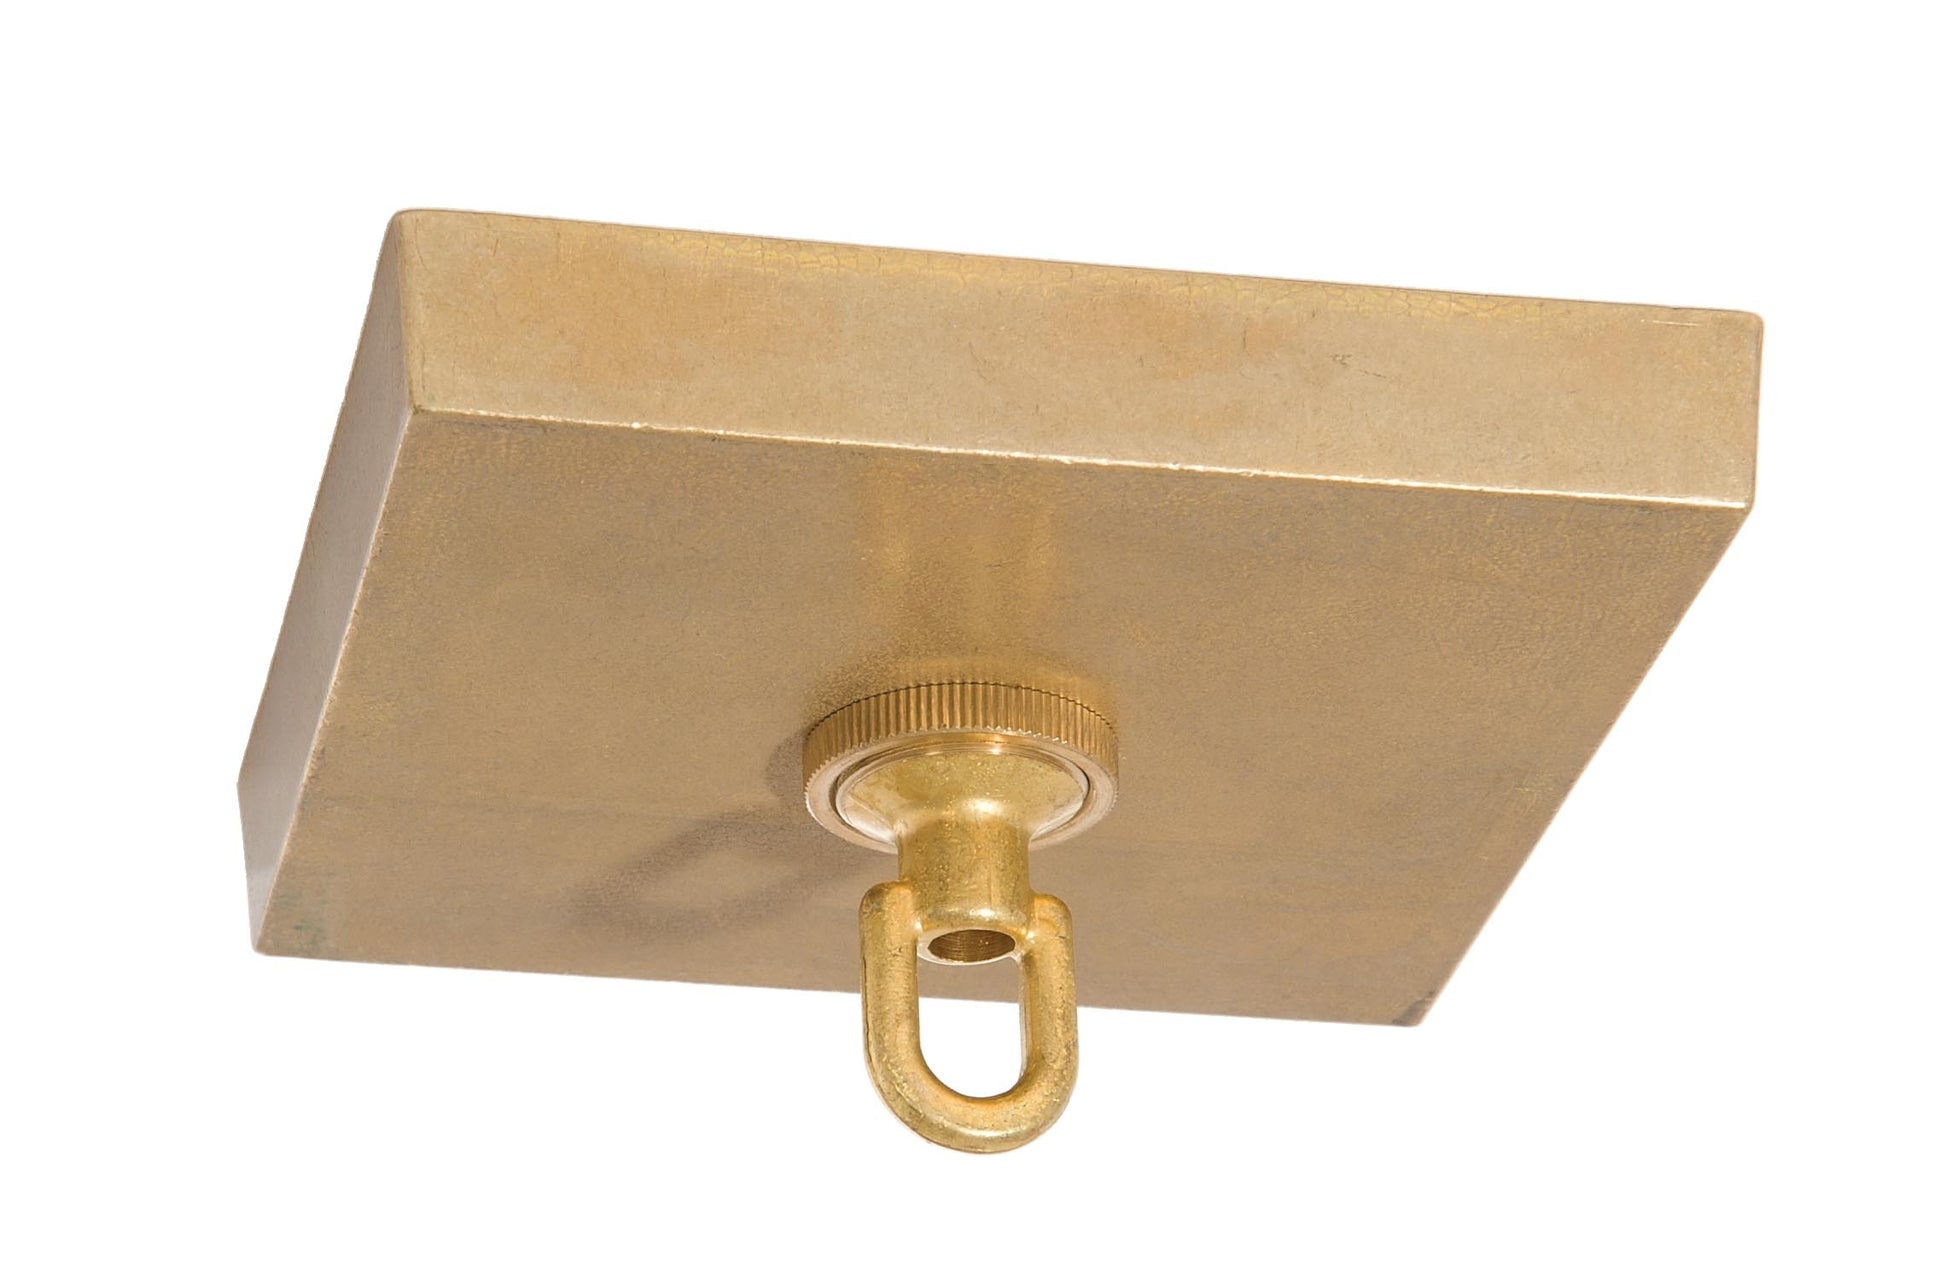 5 Inch Top Quality Die Cast Brass Canopy With Screw Collar Loop & Ceiling Hardware, Unfinished 